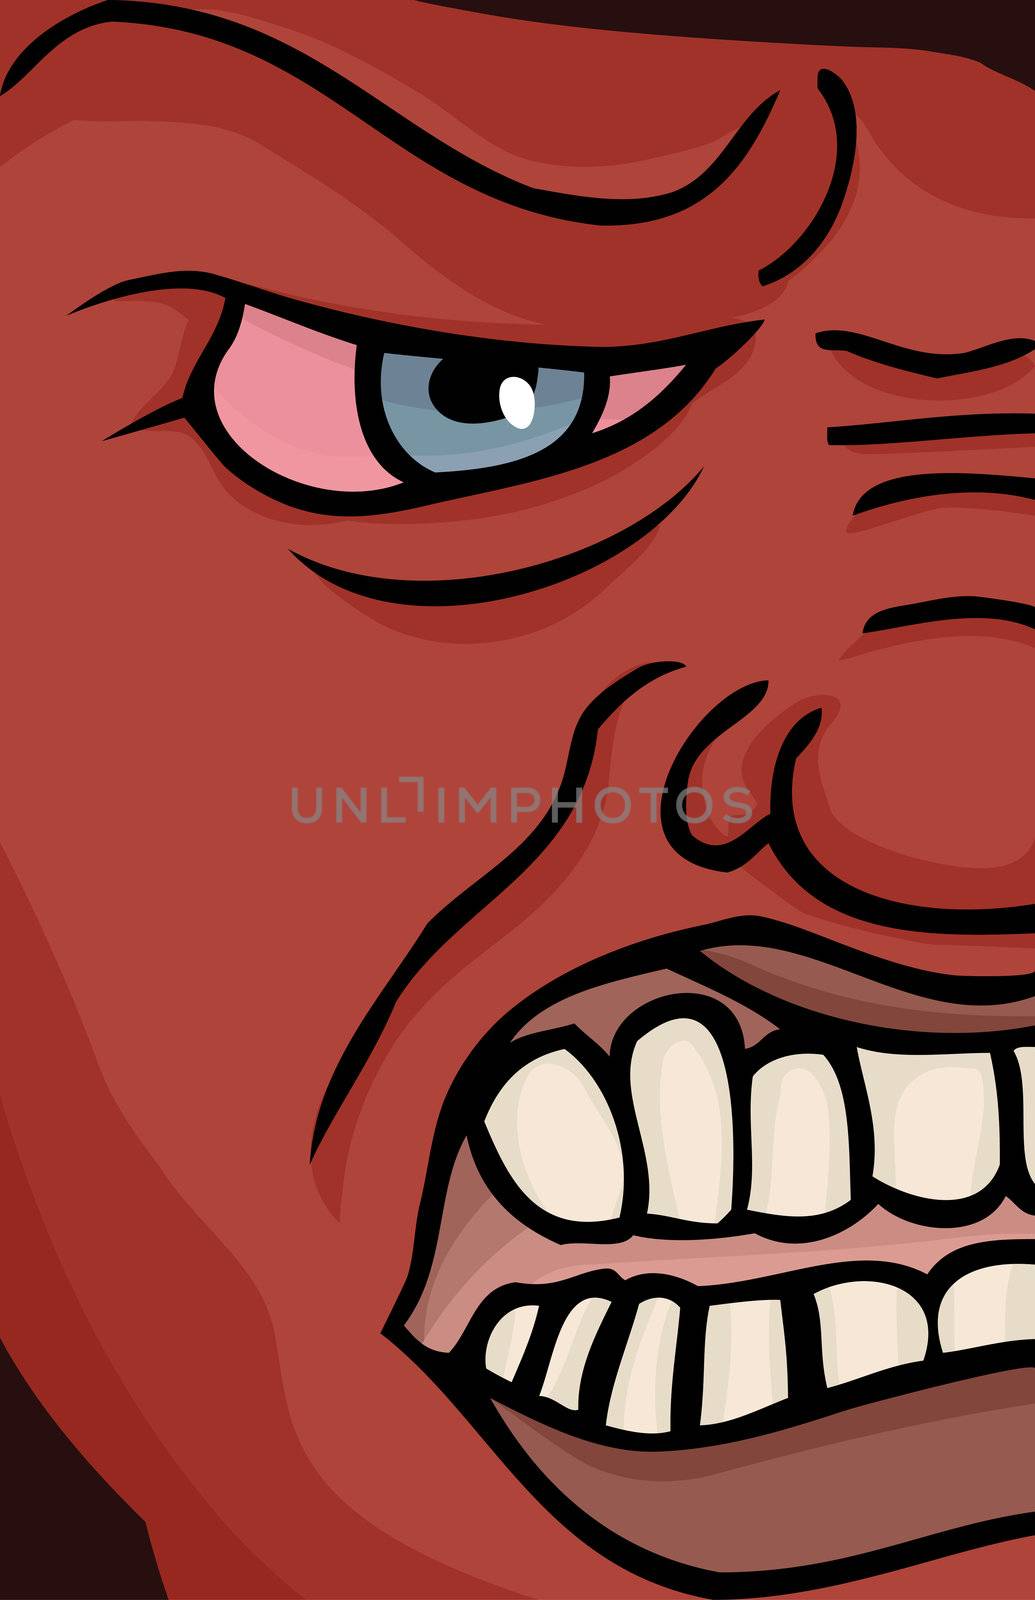 Close up illustration of a red enraged face